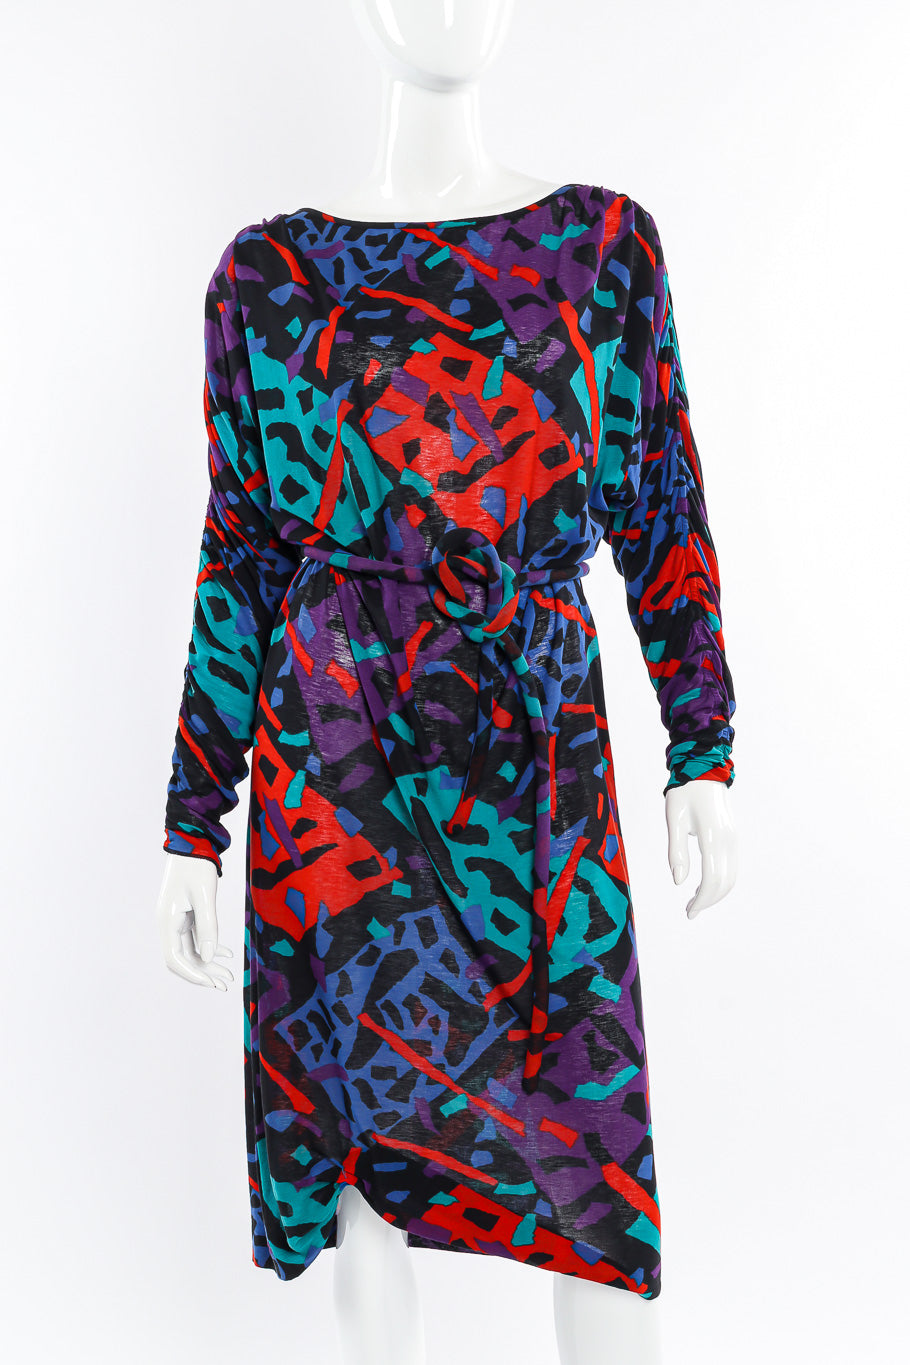 Ruched sleeve batwing dress by Missoni on mannequin front close @recessla